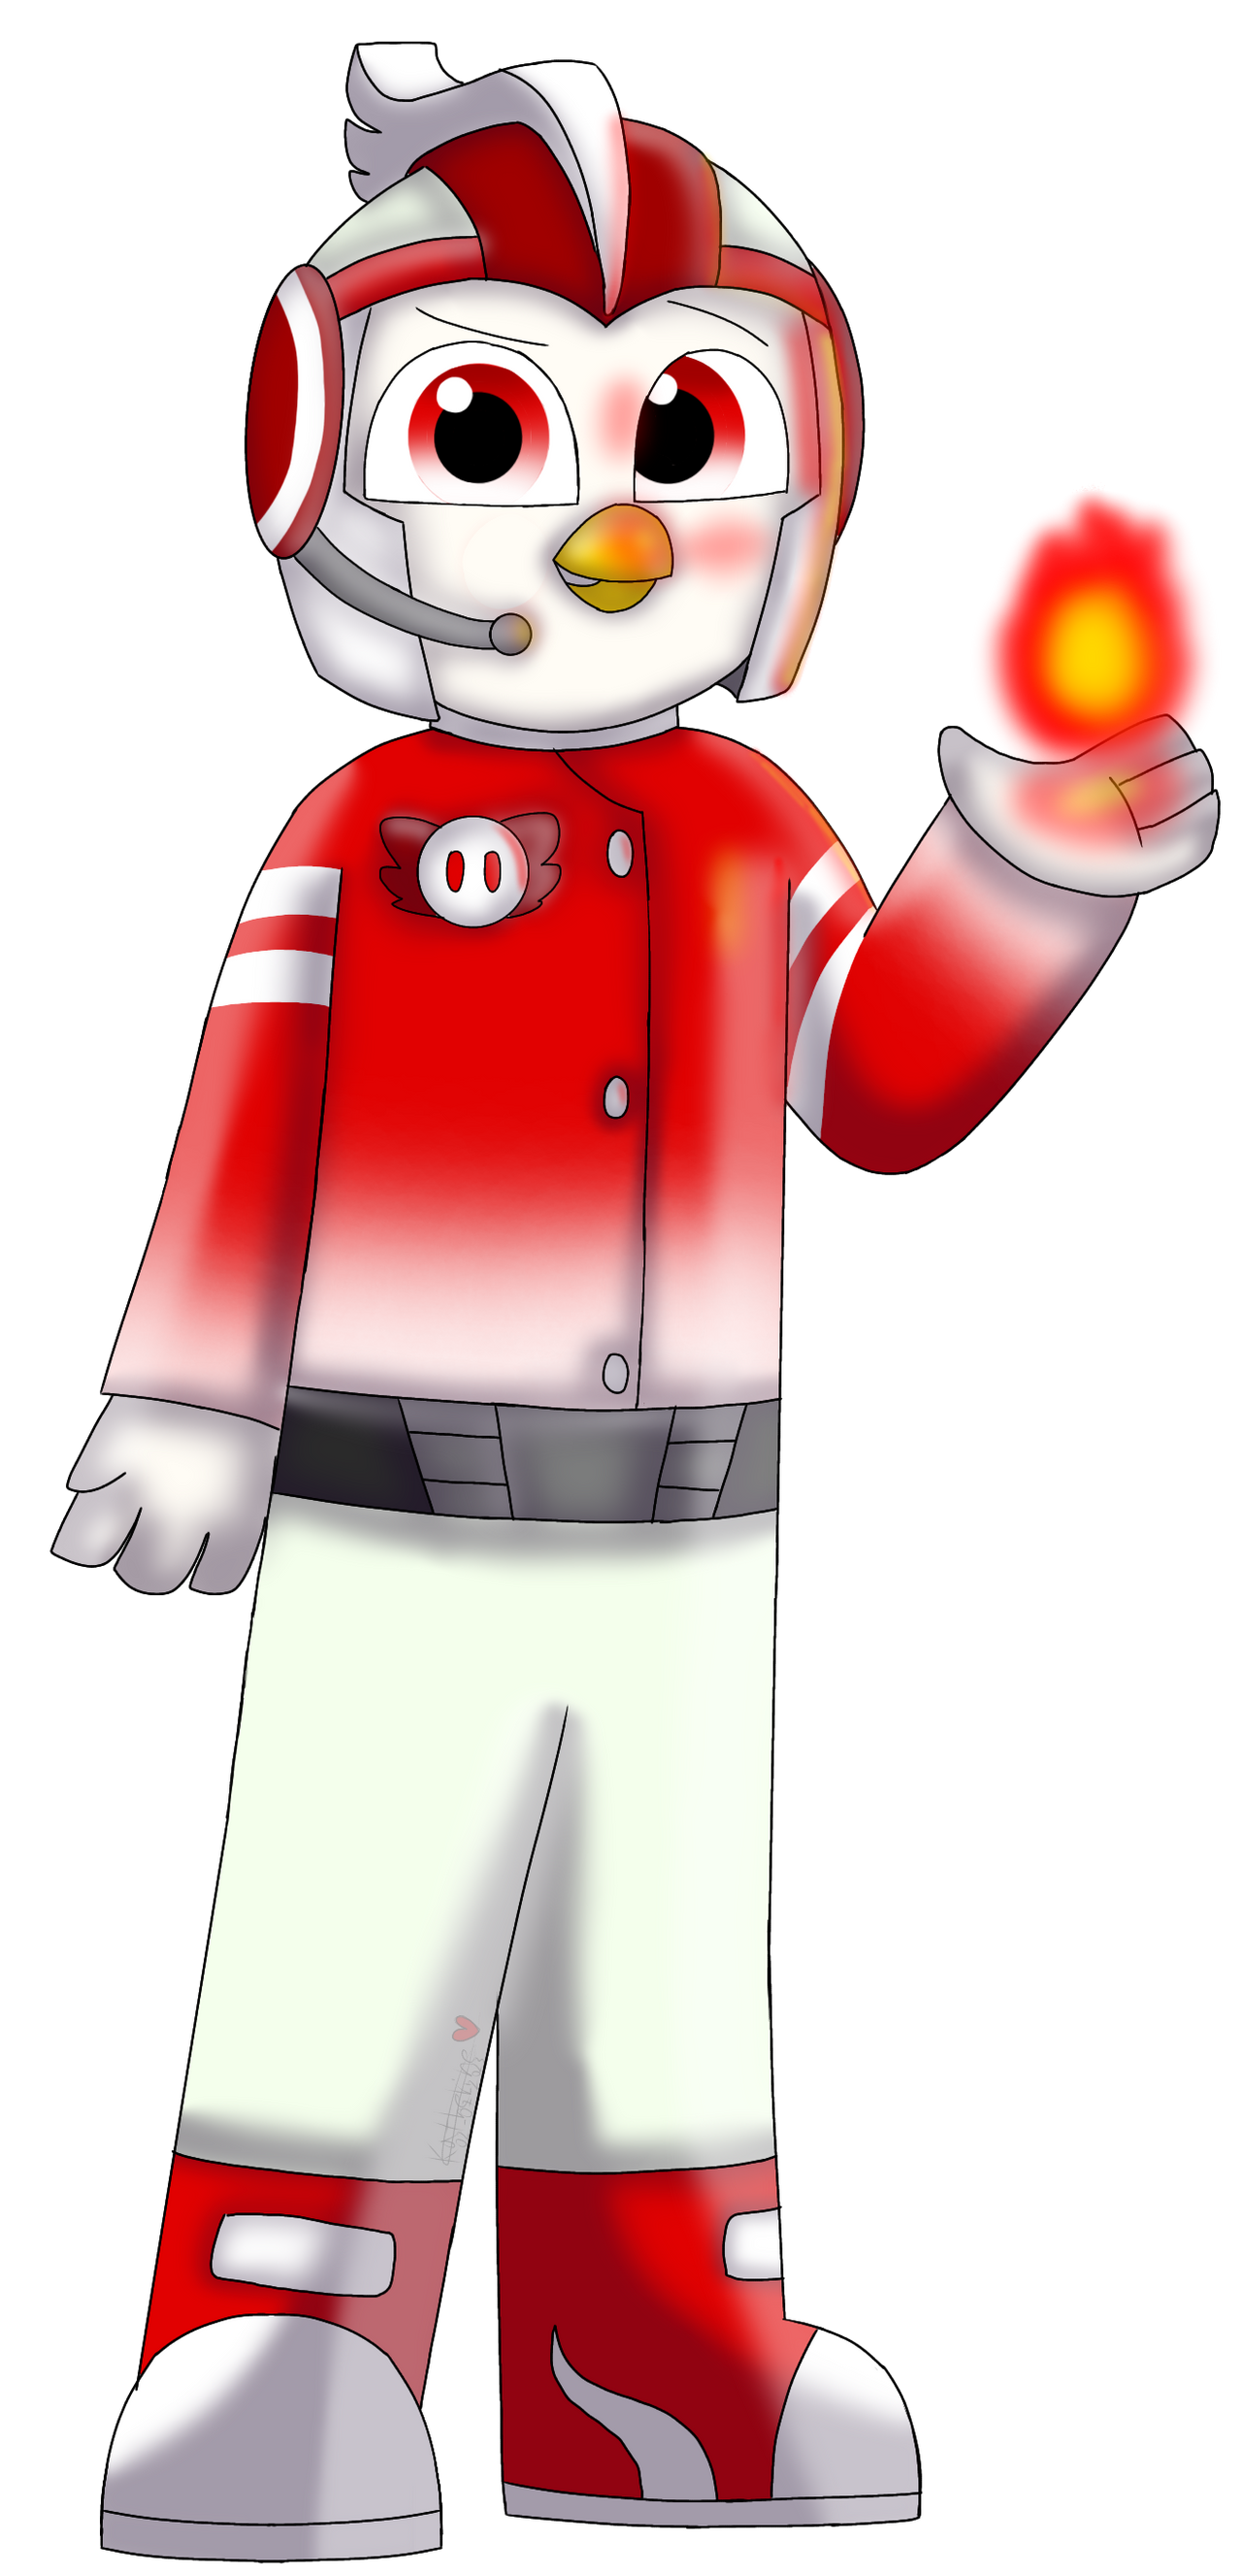 Top wing oc - Chase by PennyTw78 on DeviantArt